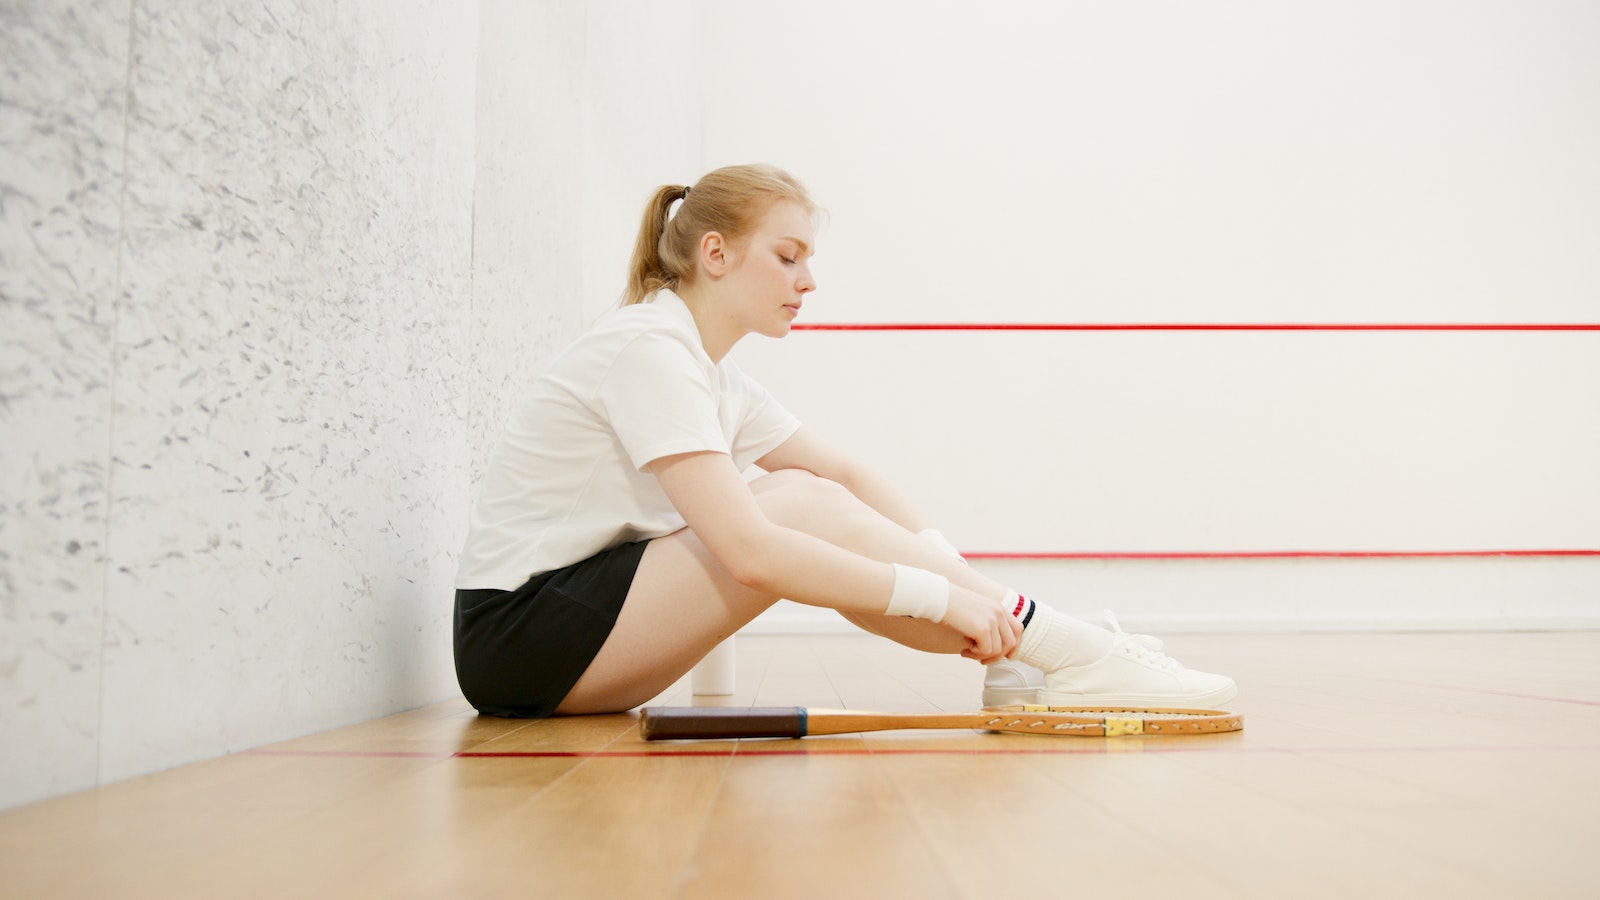 A Young Woman Sitting beside her Squash Racket